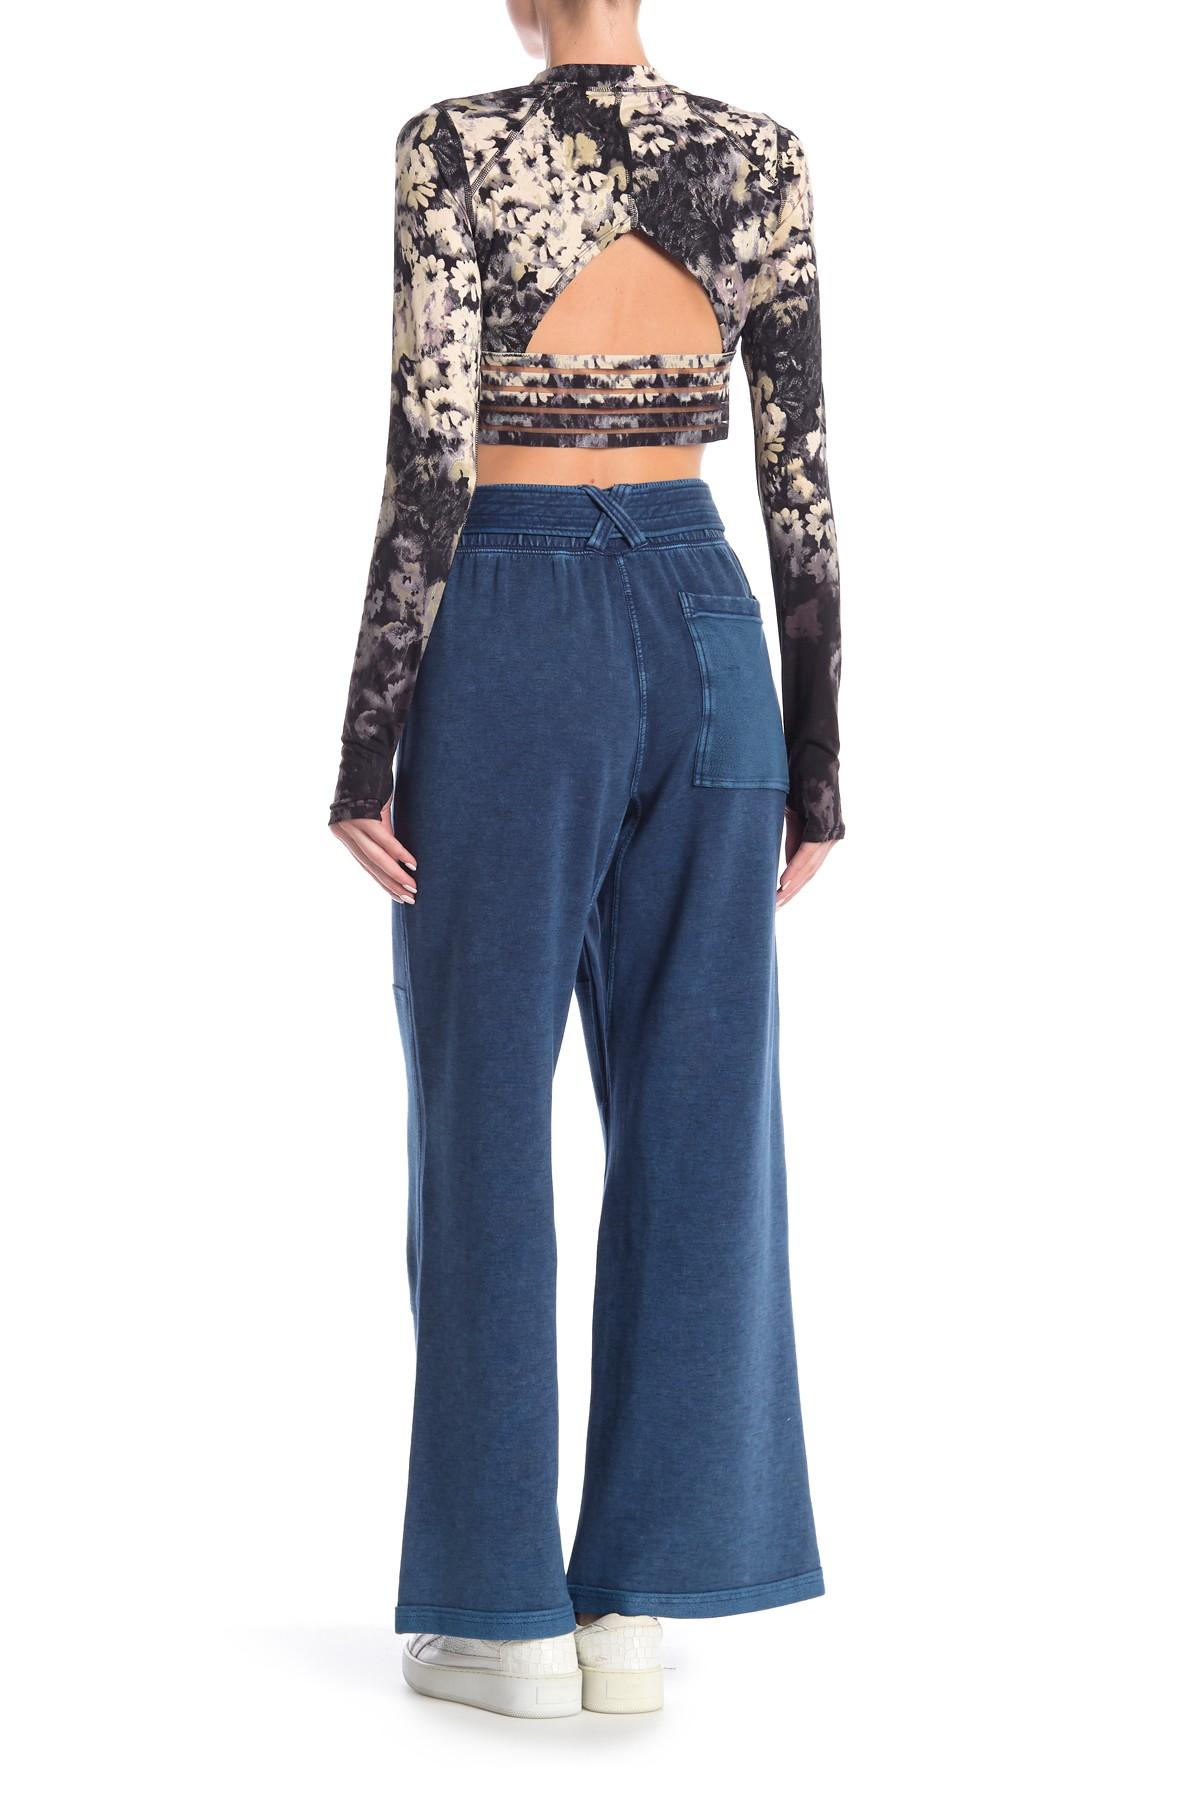 Free People Cotton Knock Out Wide Leg Sweatpants in Navy (Blue) - Lyst